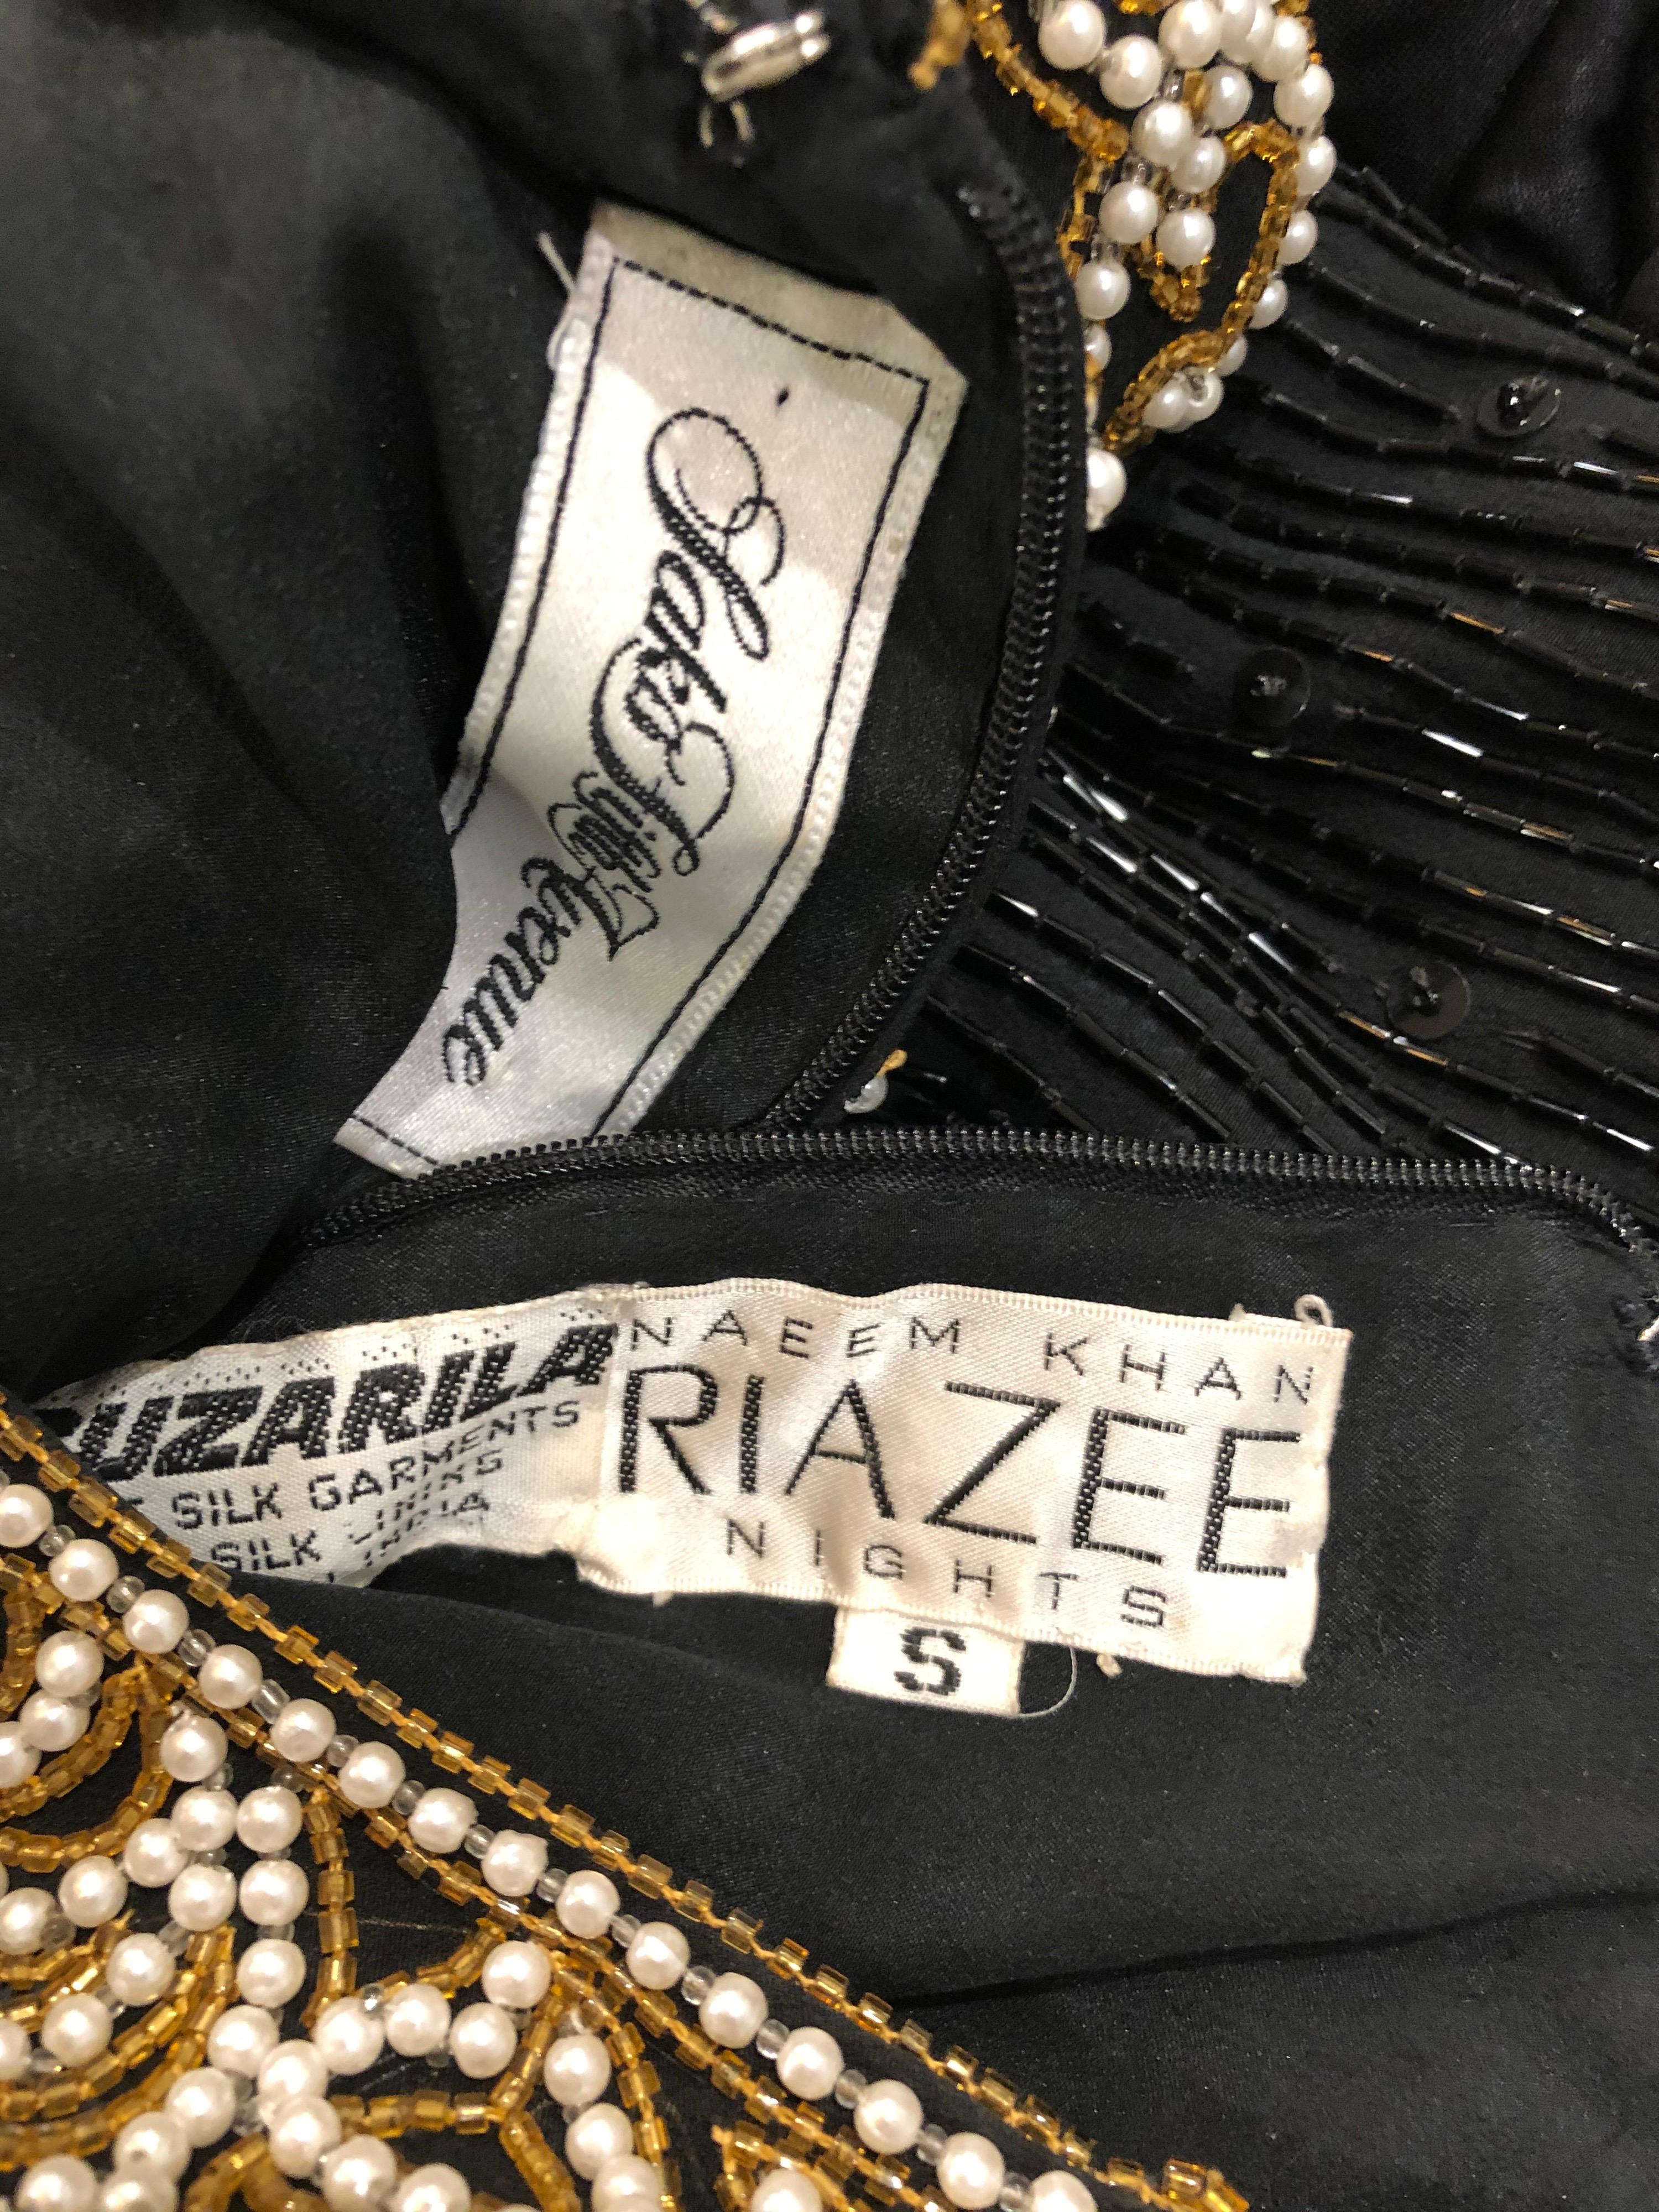 Amazing vintage NAEEM KHAN Riazee for SAKS 5th AVE black beaded and pearl encrusted fringe silk chiffon dress! Features thousands of black seed beads and sequins hand-sewn throughout the entire dress. Pearls and gold beads encrusted on the front and